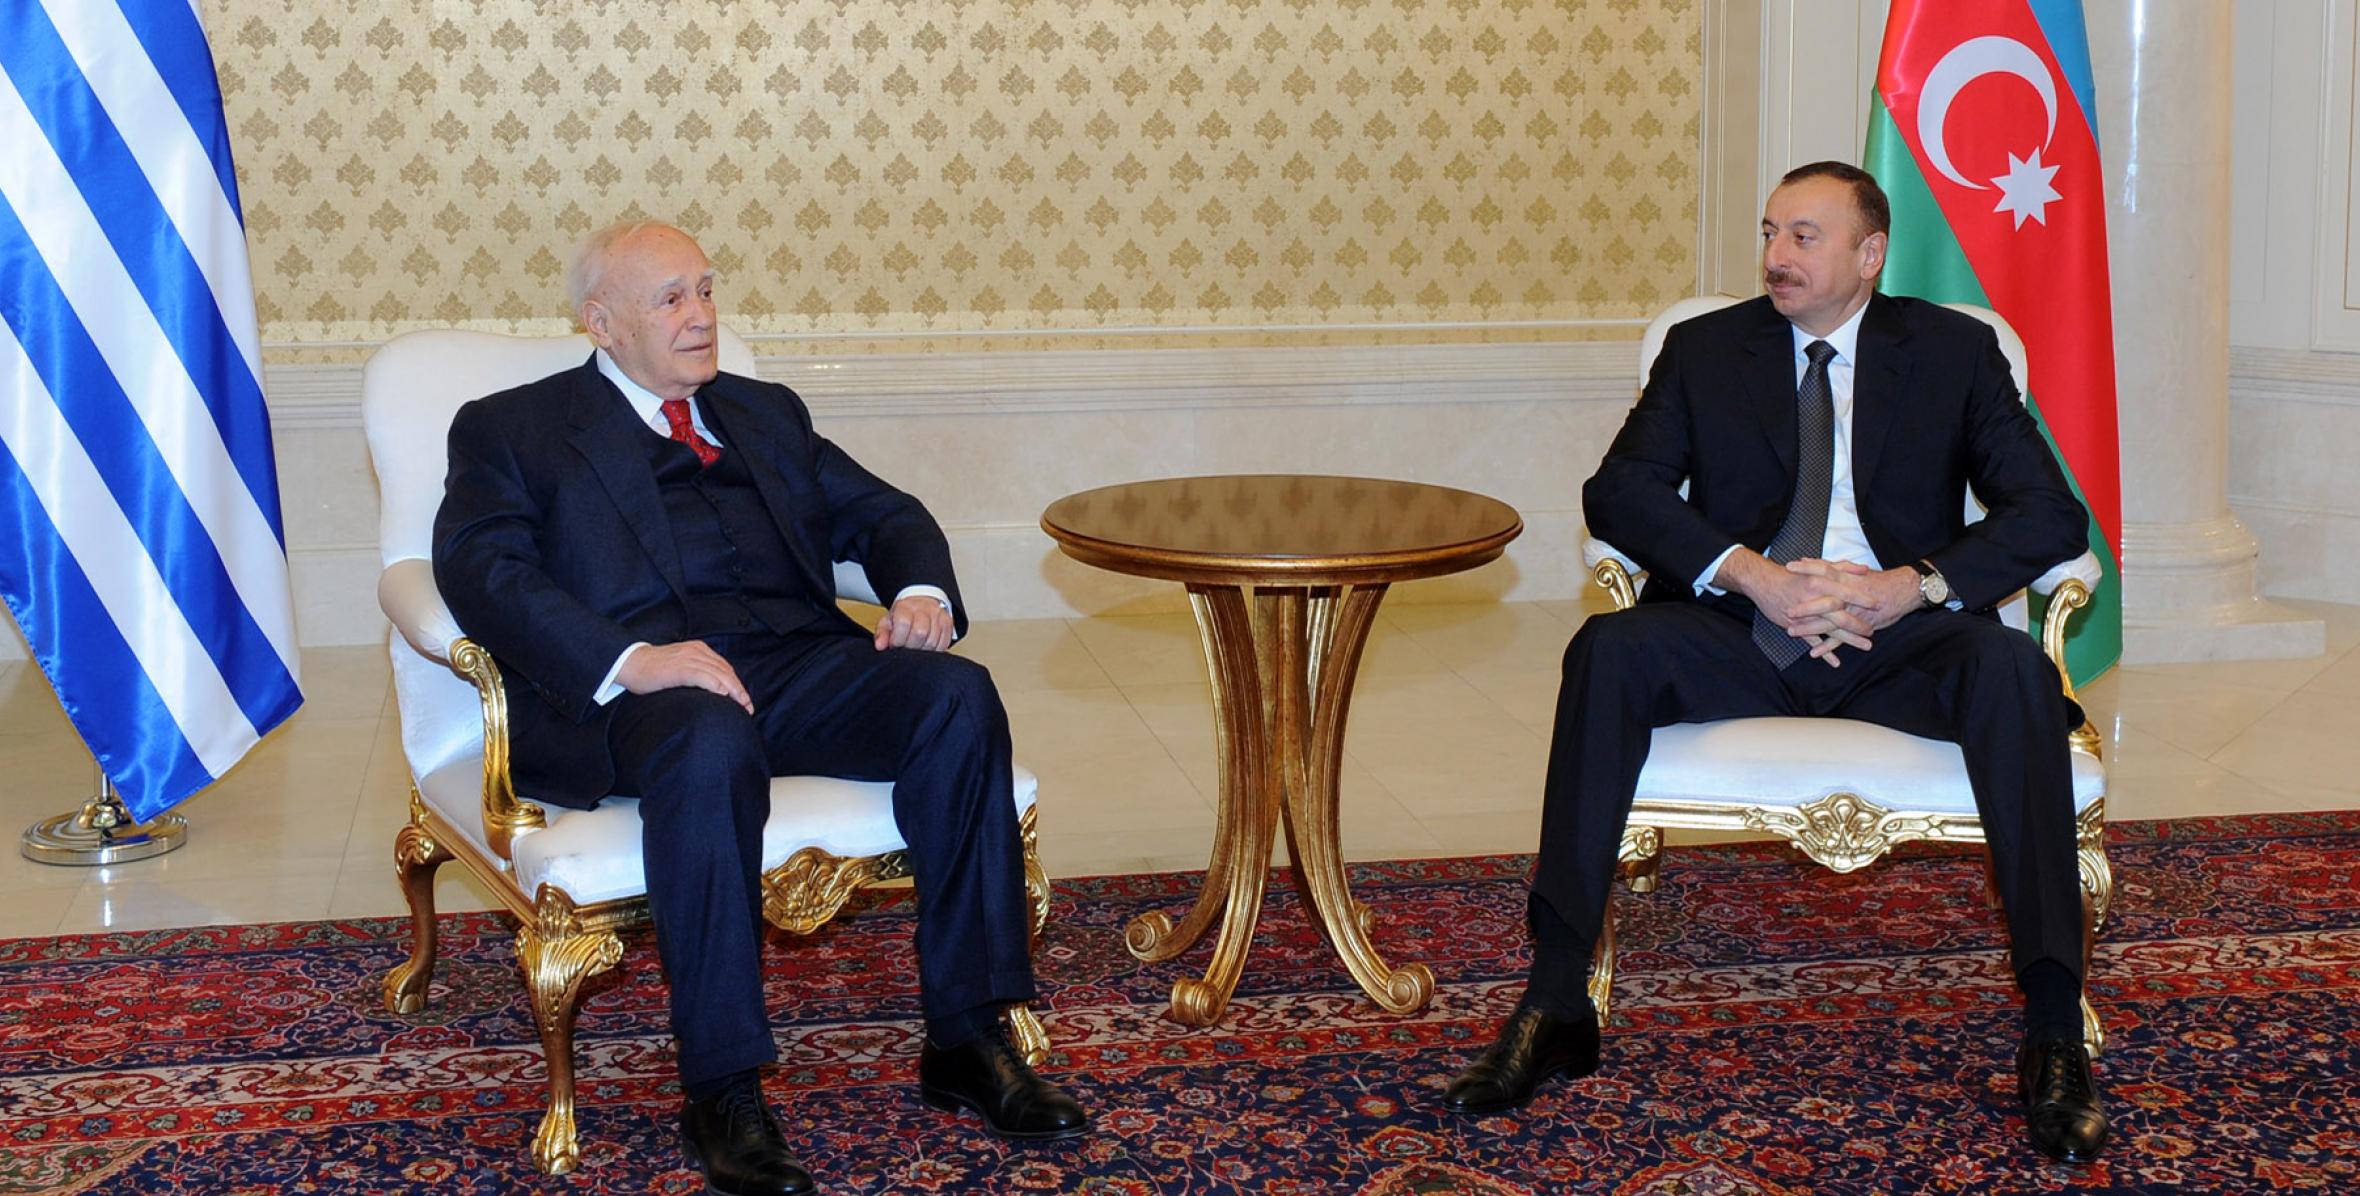 Ilham Aliyev and Greek President Karolos Papoulias had a face-to-face meeting